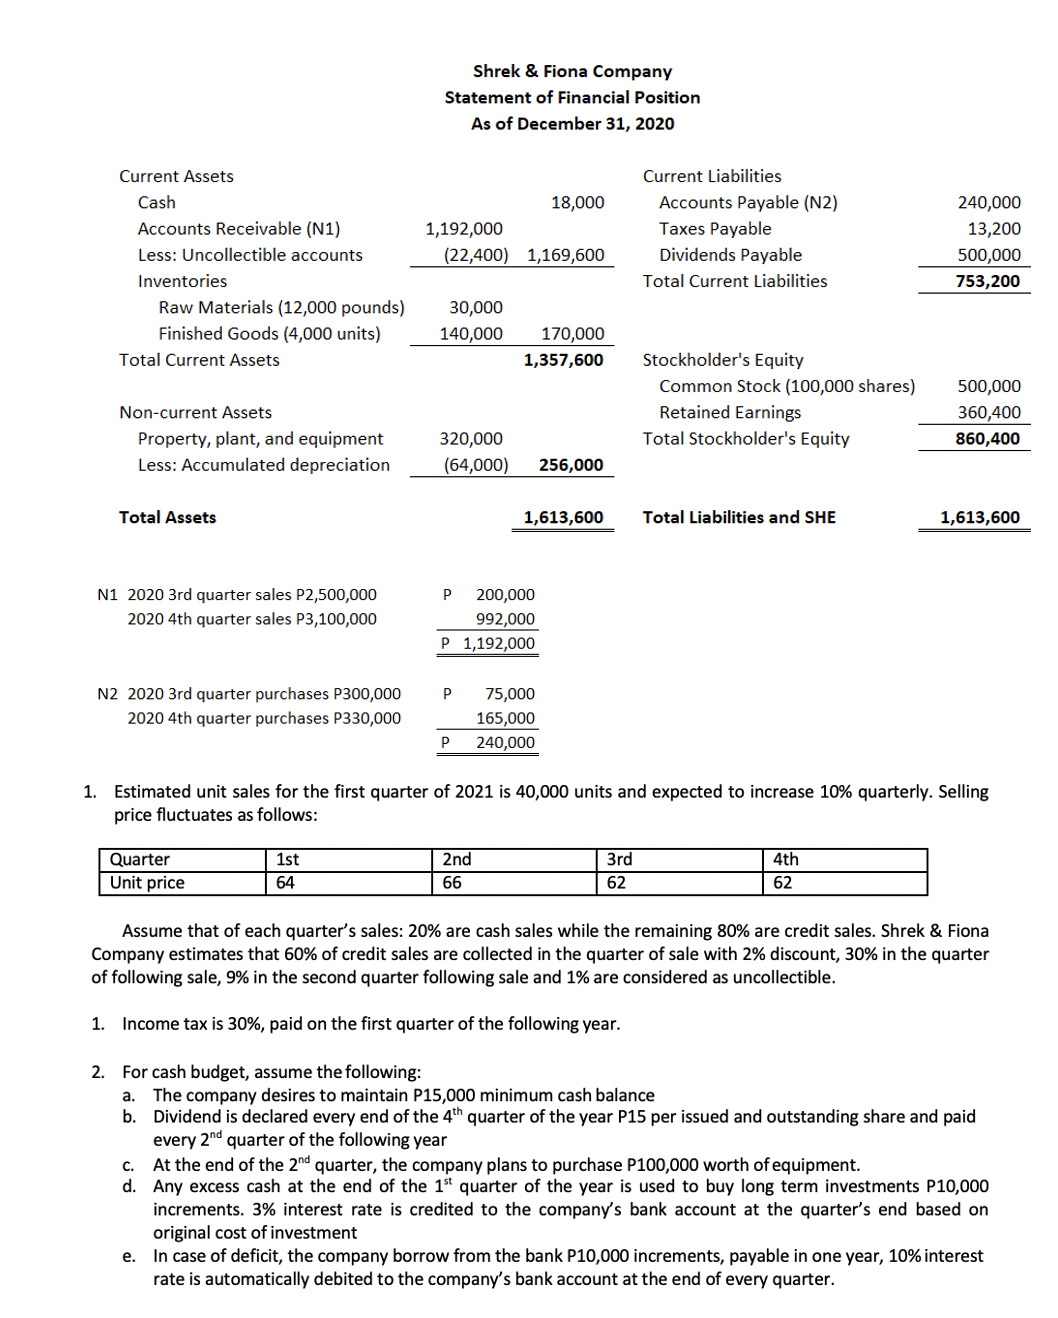 Shrek & Fiona Company
Statement of Financial Position
As of December 31, 2020
Current Assets
Current Liabilities
Cash
18,000
Accounts Payable (N2)
240,000
Accounts Receivable (N1)
1,192,000
Taxes Payable
13,200
Less: Uncollectible accounts
(22,400) 1,169,600
Dividends Payable
500,000
Inventories
Total Current Liabilities
753,200
Raw Materials (12,000 pounds)
Finished Goods (4,000 units)
30,000
140,000
170,000
Total Current Assets
1,357,600
Stockholder's Equity
Common Stock (100,000 shares)
500,000
Non-current Assets
Retained Earnings
360,400
Property, plant, and equipment
320,000
Total Stockholder's Equity
860,400
Less: Accumulated depreciation
(64,000)
256,000
Total Assets
1,613,600
Total Liabilities and SHE
1,613,600
N1 2020 3rd quarter sales P2,500,000
P
200,000
2020 4th quarter sales P3,100,000
992,000
P 1,192,000
N2 2020 3rd quarter purchases P300,000
75,000
165,000
2020 4th quarter purchases P330,000
P
240,000
1. Estimated unit sales for the first quarter of 2021 is 40,000 units and expected to increase 10% quarterly. Selling
price fluctuates as follows:
Quarter
1st
2nd
3rd
4th
Unit price
64
66
62
62
Assume that of each quarter's sales: 20% are cash sales while the remaining 80% are credit sales. Shrek & Fiona
Company estimates that 60% of credit sales are collected in the quarter of sale with 2% discount, 30% in the quarter
of following sale, 9% in the second quarter following sale and 1% are considered as uncollectible.
1. Income tax is 30%, paid on the first quarter of the following year.
2. For cash budget, assume the following:
a. The company desires to maintain P15,000 minimum cash balance
b. Dividend is declared every end of the 4th quarter of the year P15 per issued and outstanding share and paid
every 2nd quarter of the following year
c. At the end of the 2nd quarter, the company plans to purchase P100,000 worth of equipment.
d. Any excess cash at the end of the 1st quarter of the year is used to buy long term investments P10,000
increments. 3% interest rate is credited to the company's bank account at the quarter's end based on
original cost of investment
e. In case of deficit, the company borrow from the bank P10,000 increments, payable in one year, 10% interest
rate is automatically debited to the company's bank account at the end of every quarter.
